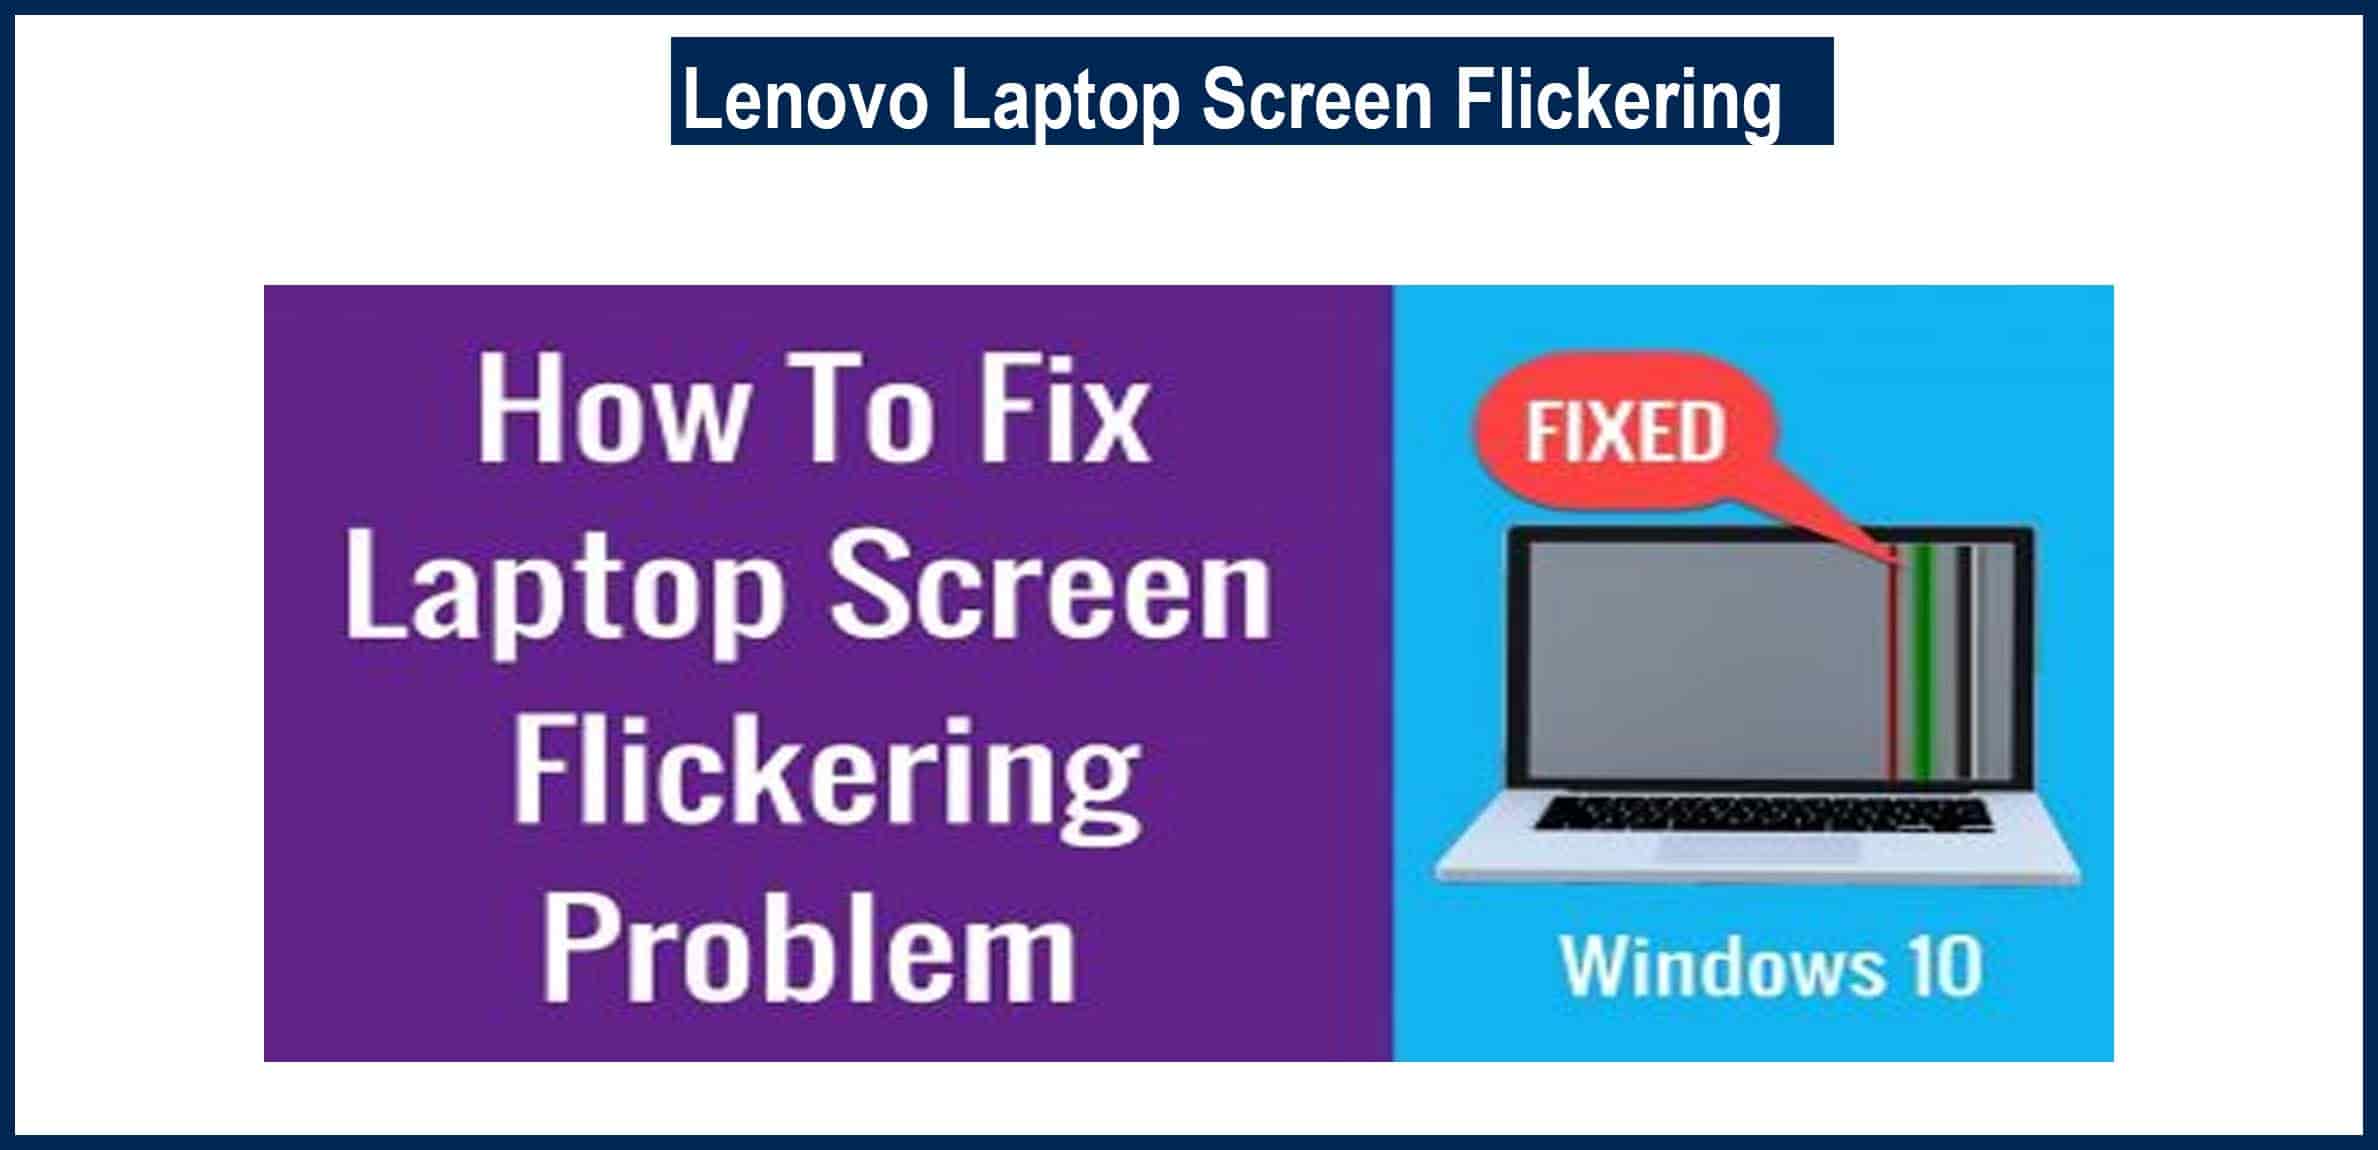 Why Does My Lenovo Laptop Screen Flickering